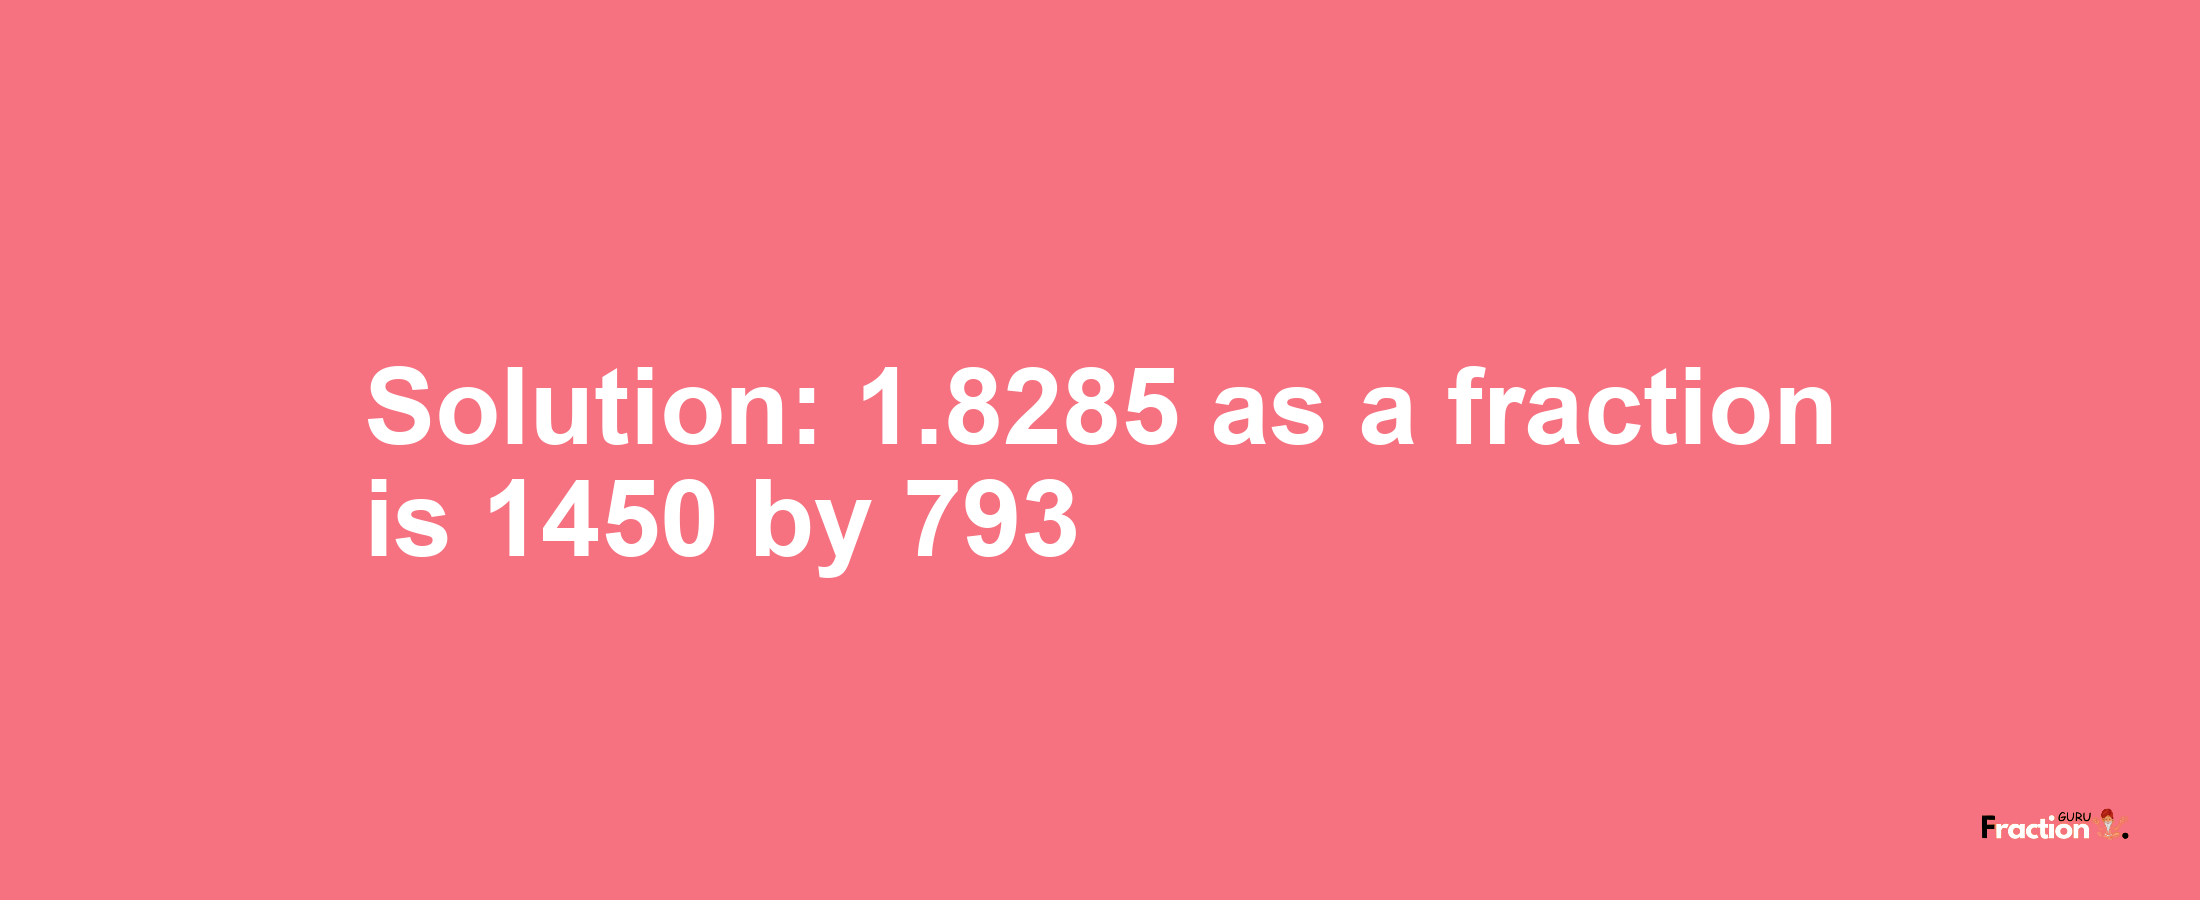 Solution:1.8285 as a fraction is 1450/793